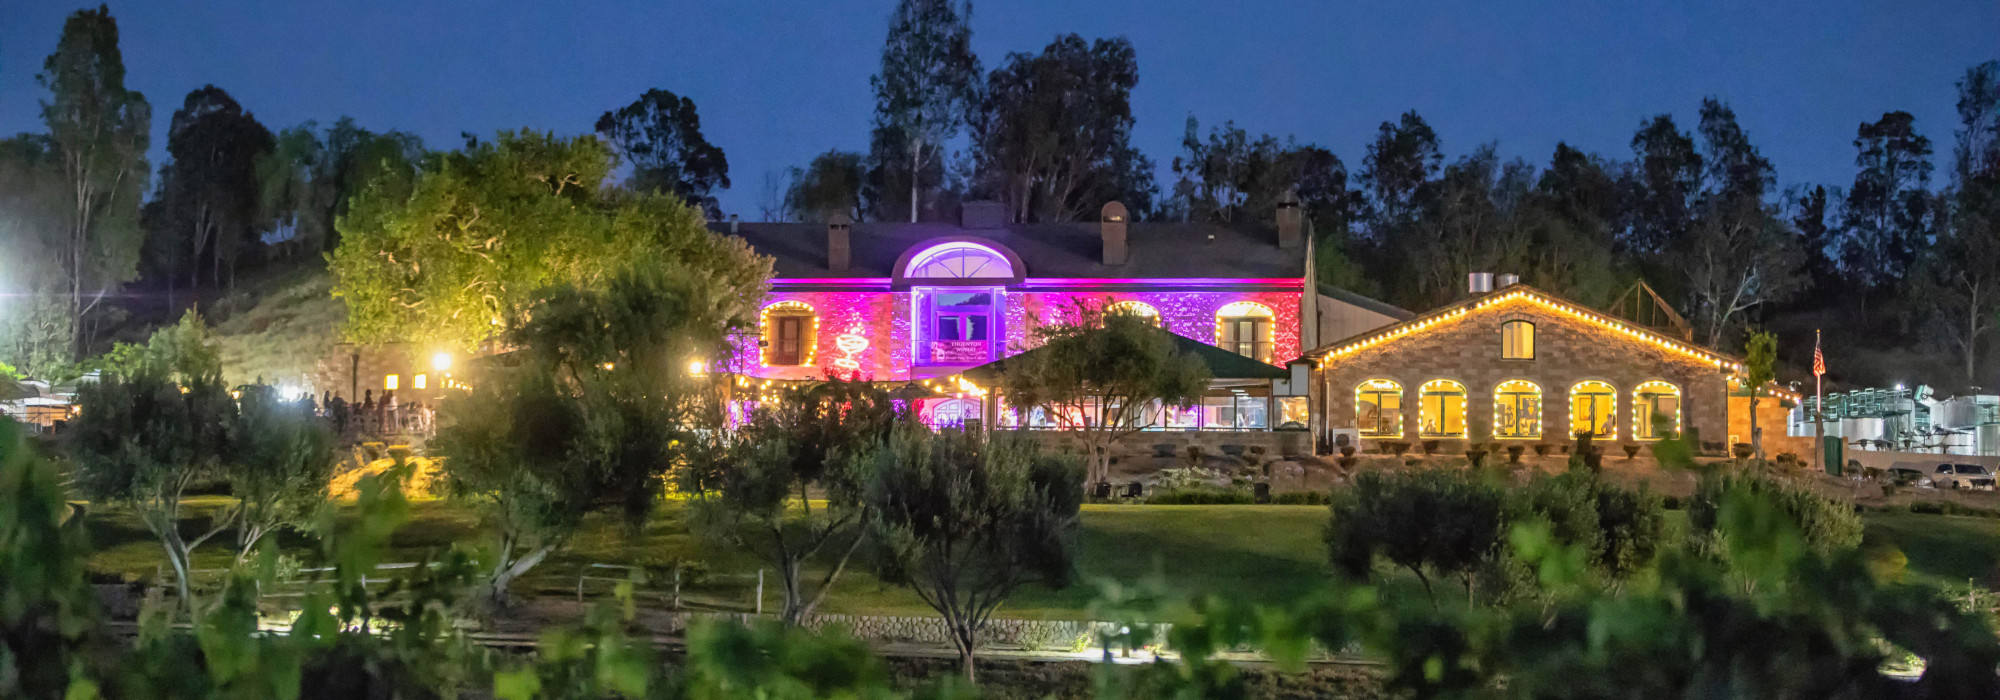 Thornton Winery – Gateway to Temecula Valley Wine Country